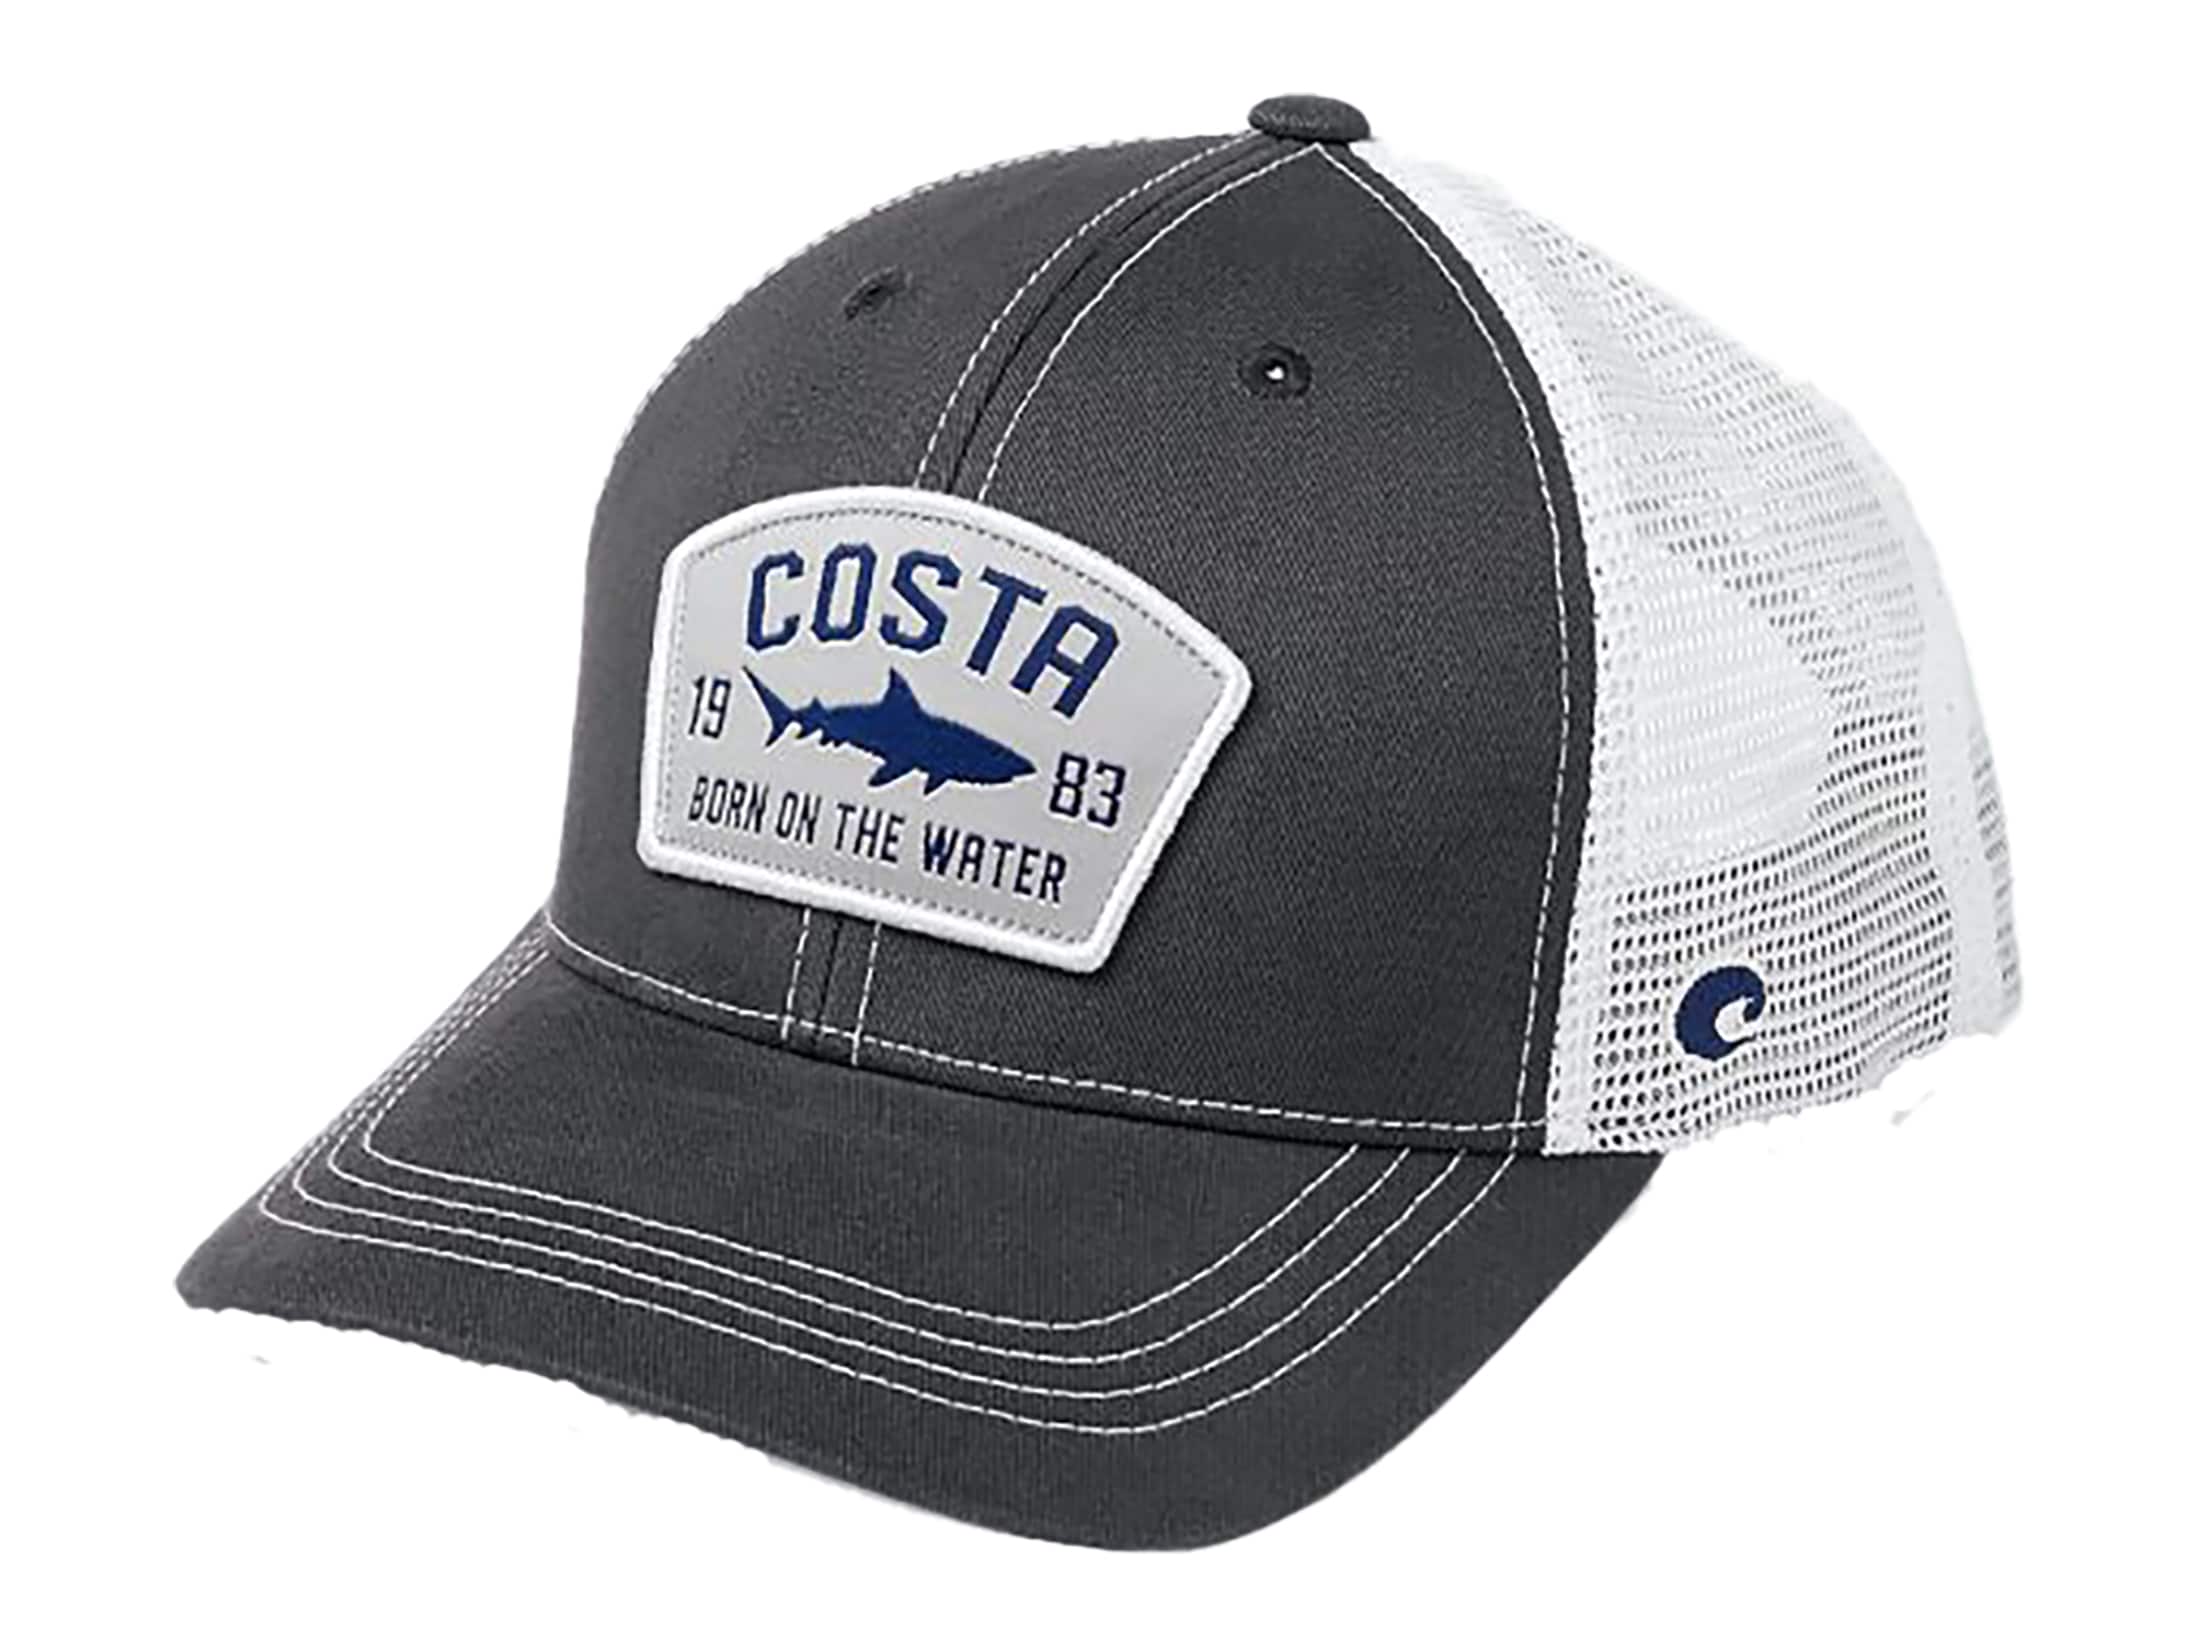 Costa Del Mar Chatham Shark Trucker Hat Gray One Size Fits Most